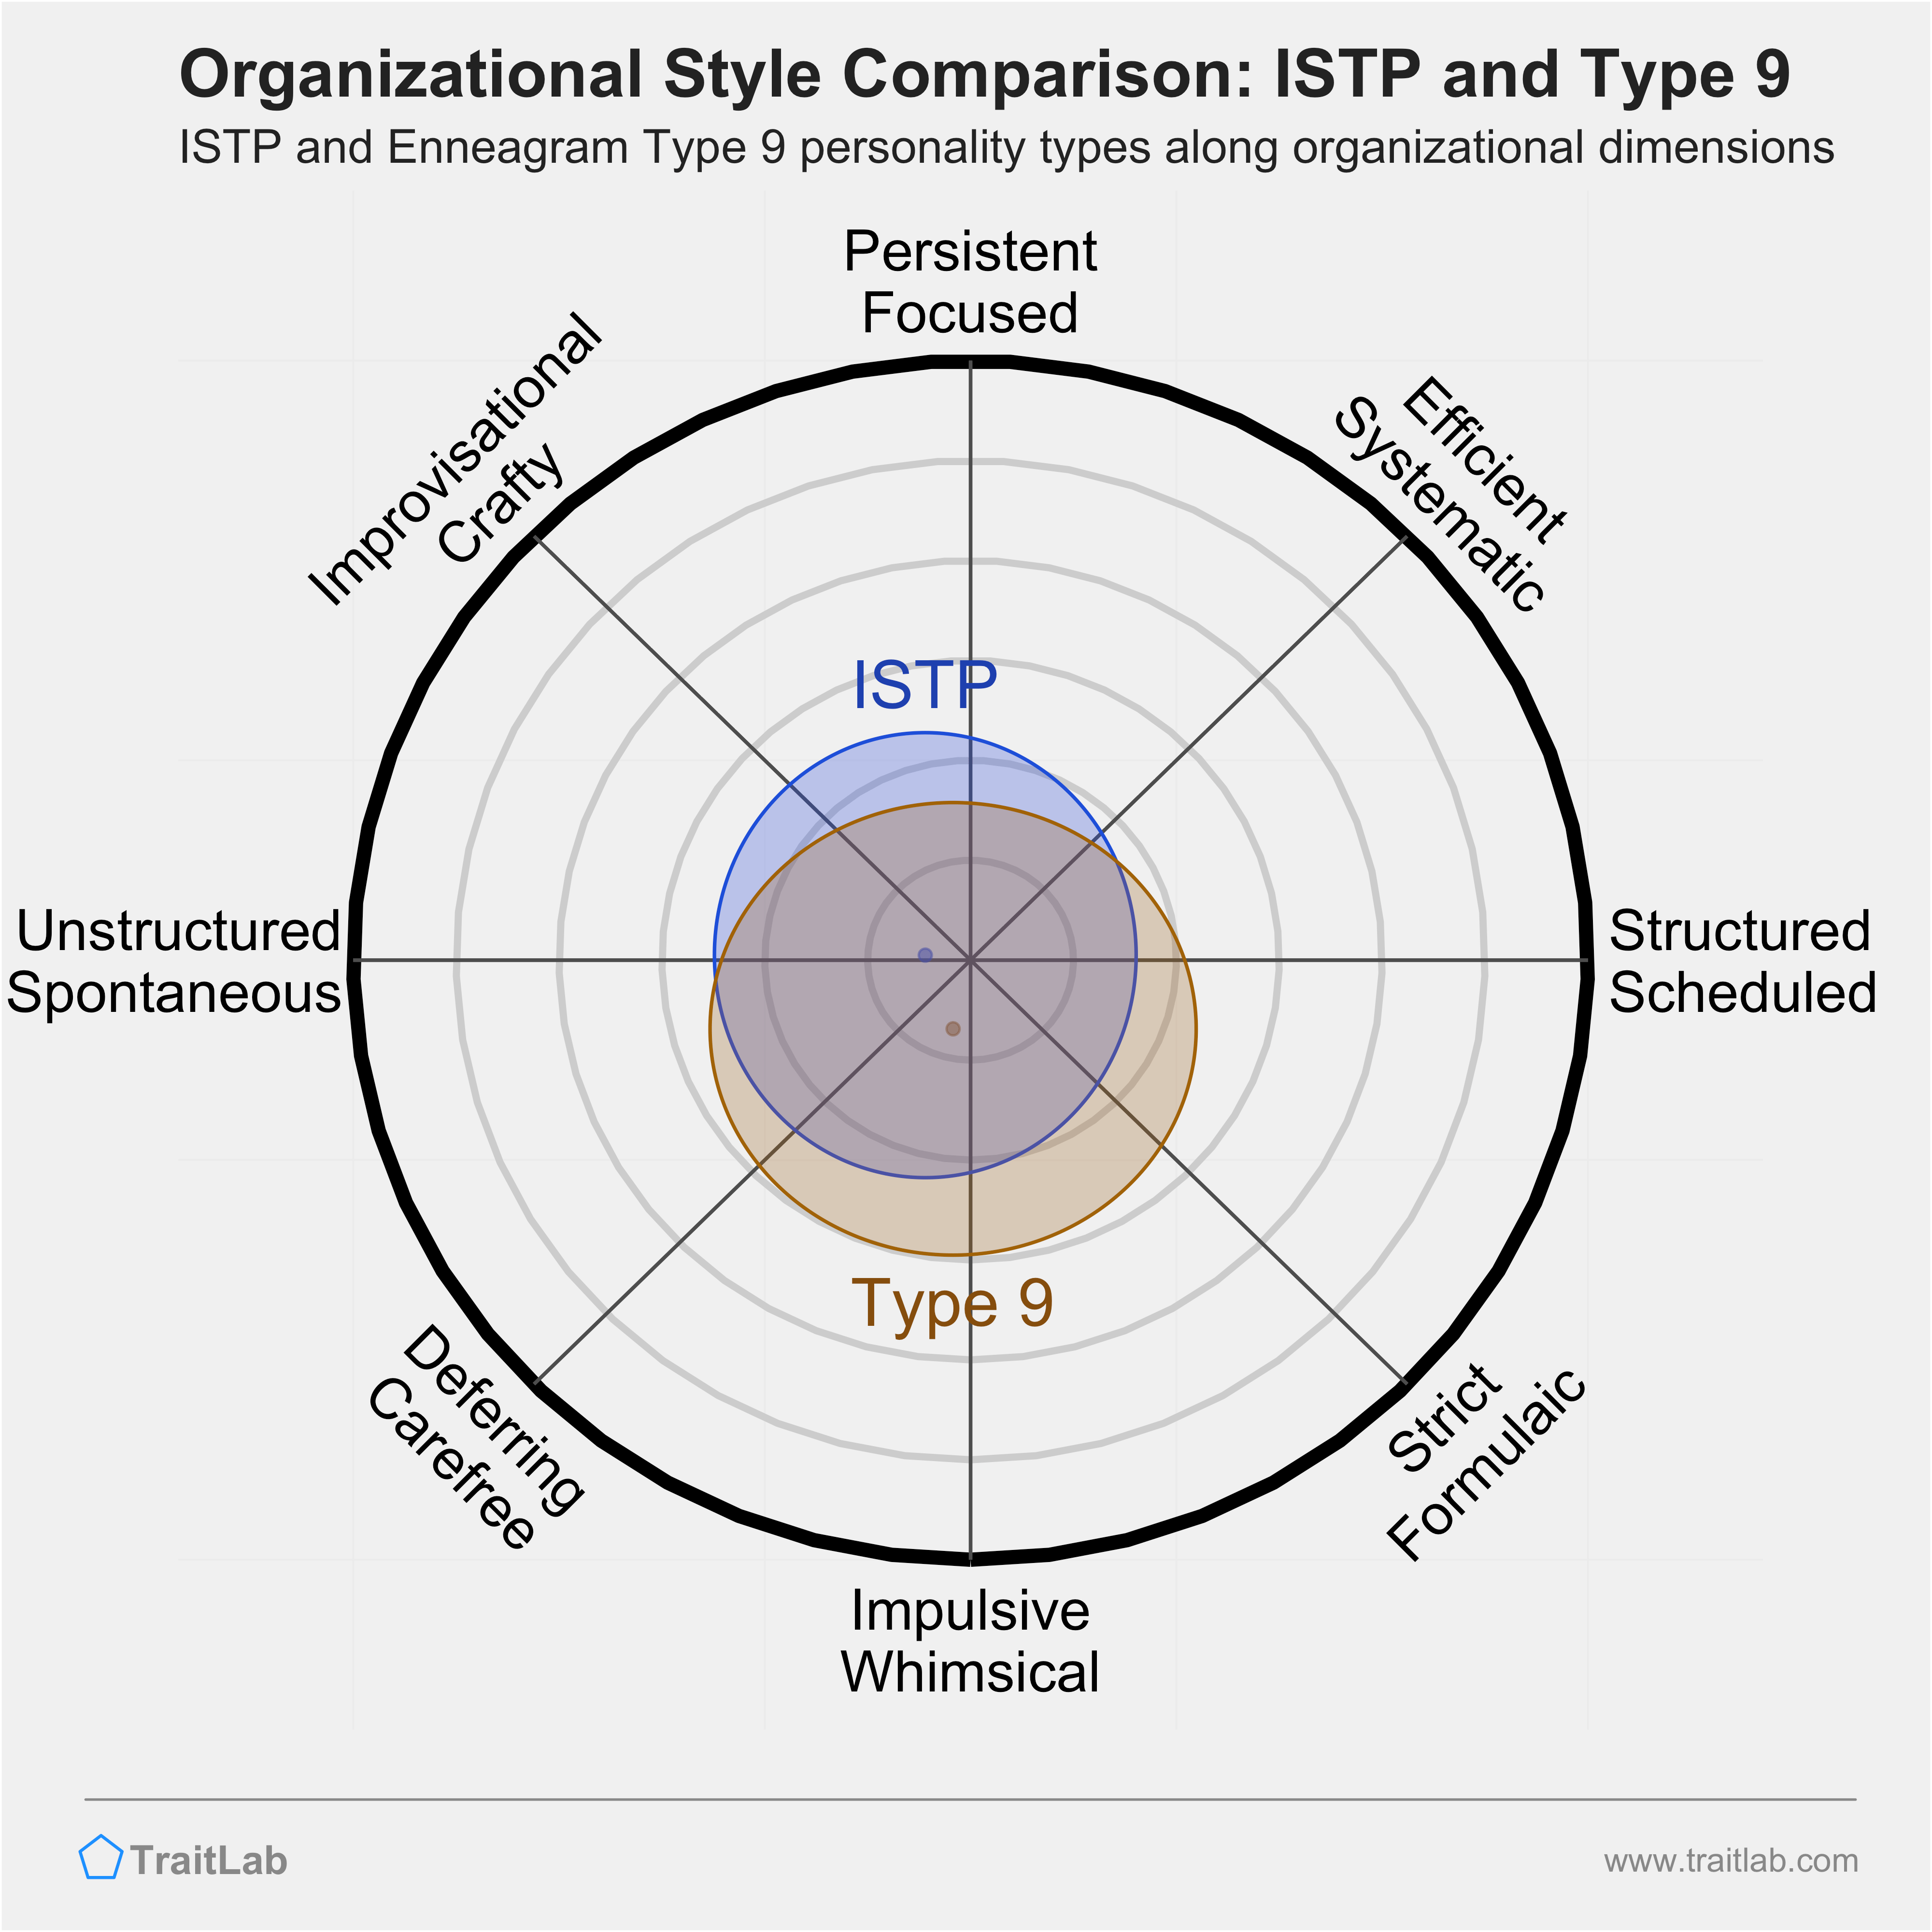 ISTP and Type 9 comparison across organizational dimensions